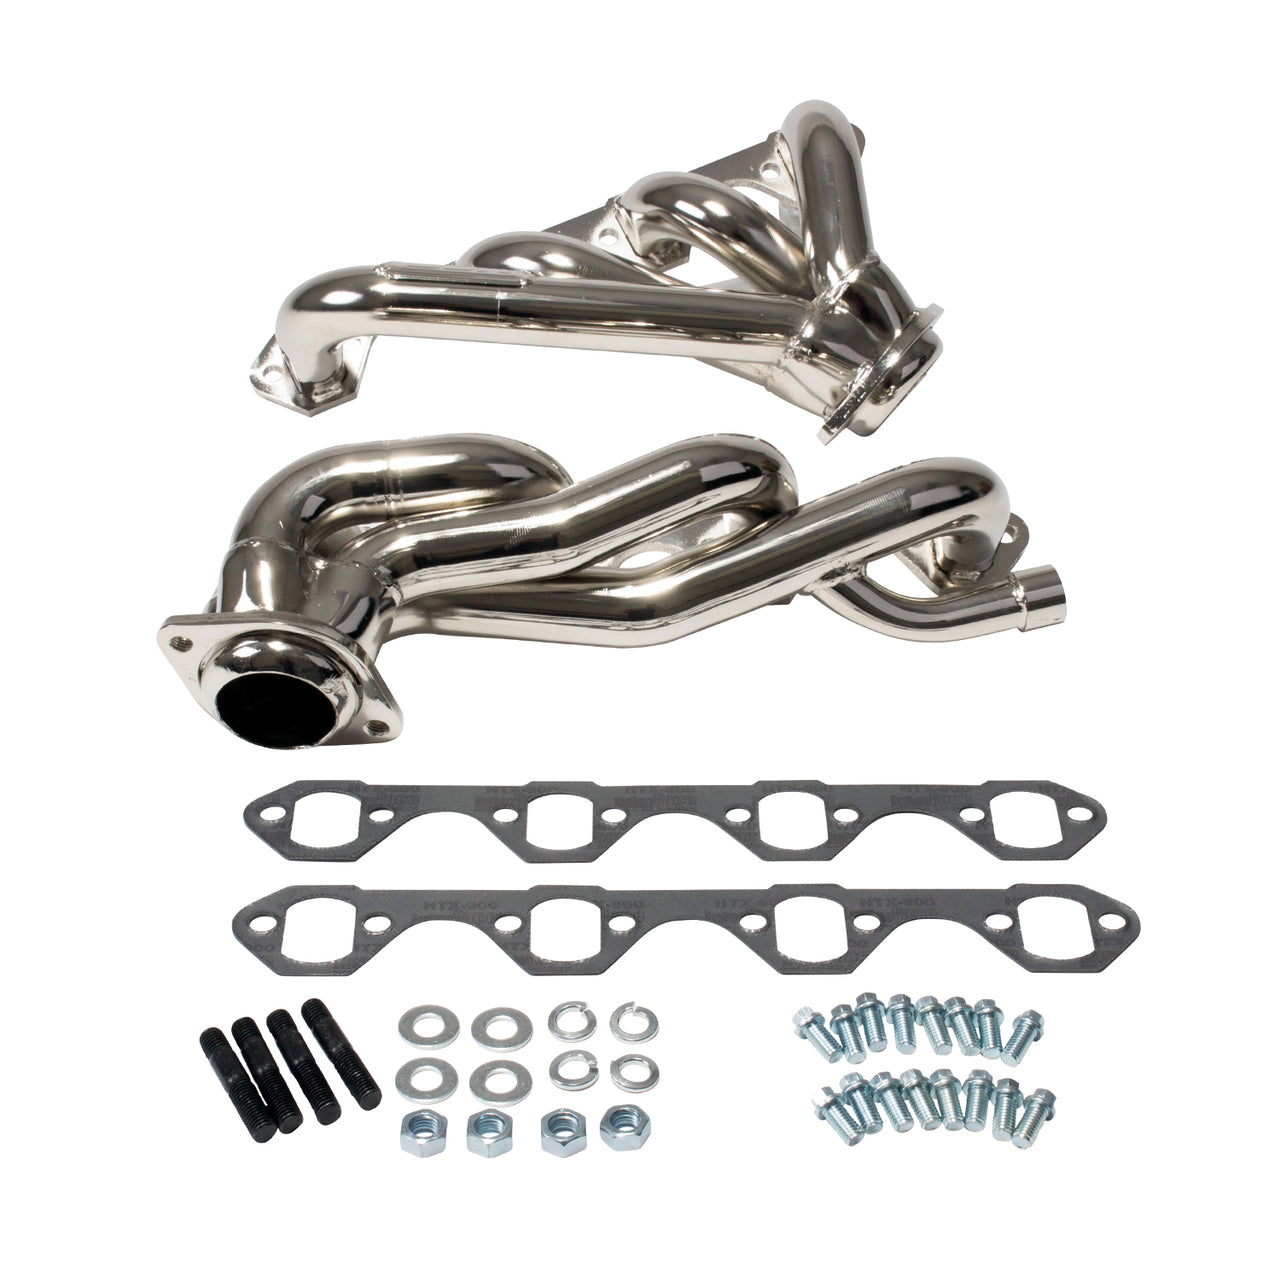 1987-1995 FORD F150 351 1-5/8 SHORTY HEADERS (CERAMIC)